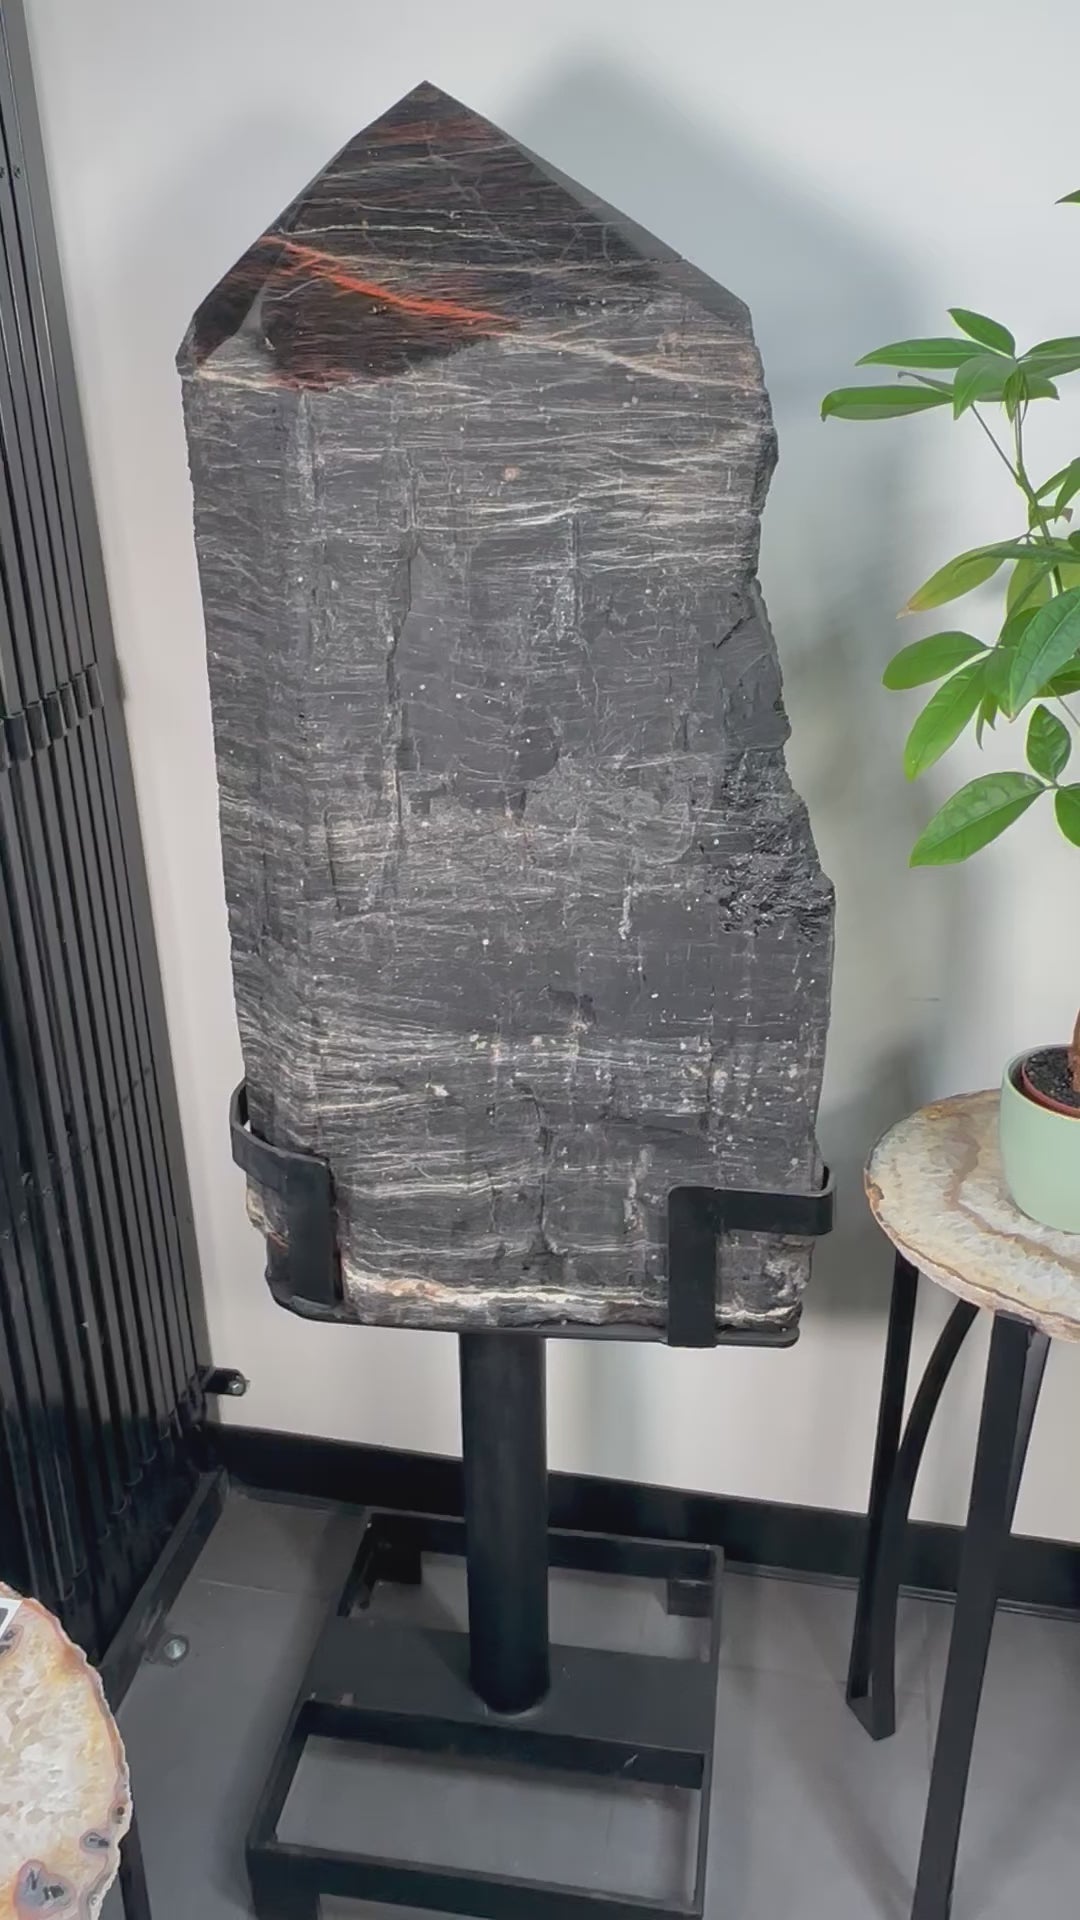 Video of a large black tourmaline point on a black metal stand.  It is black with red veining on the top.